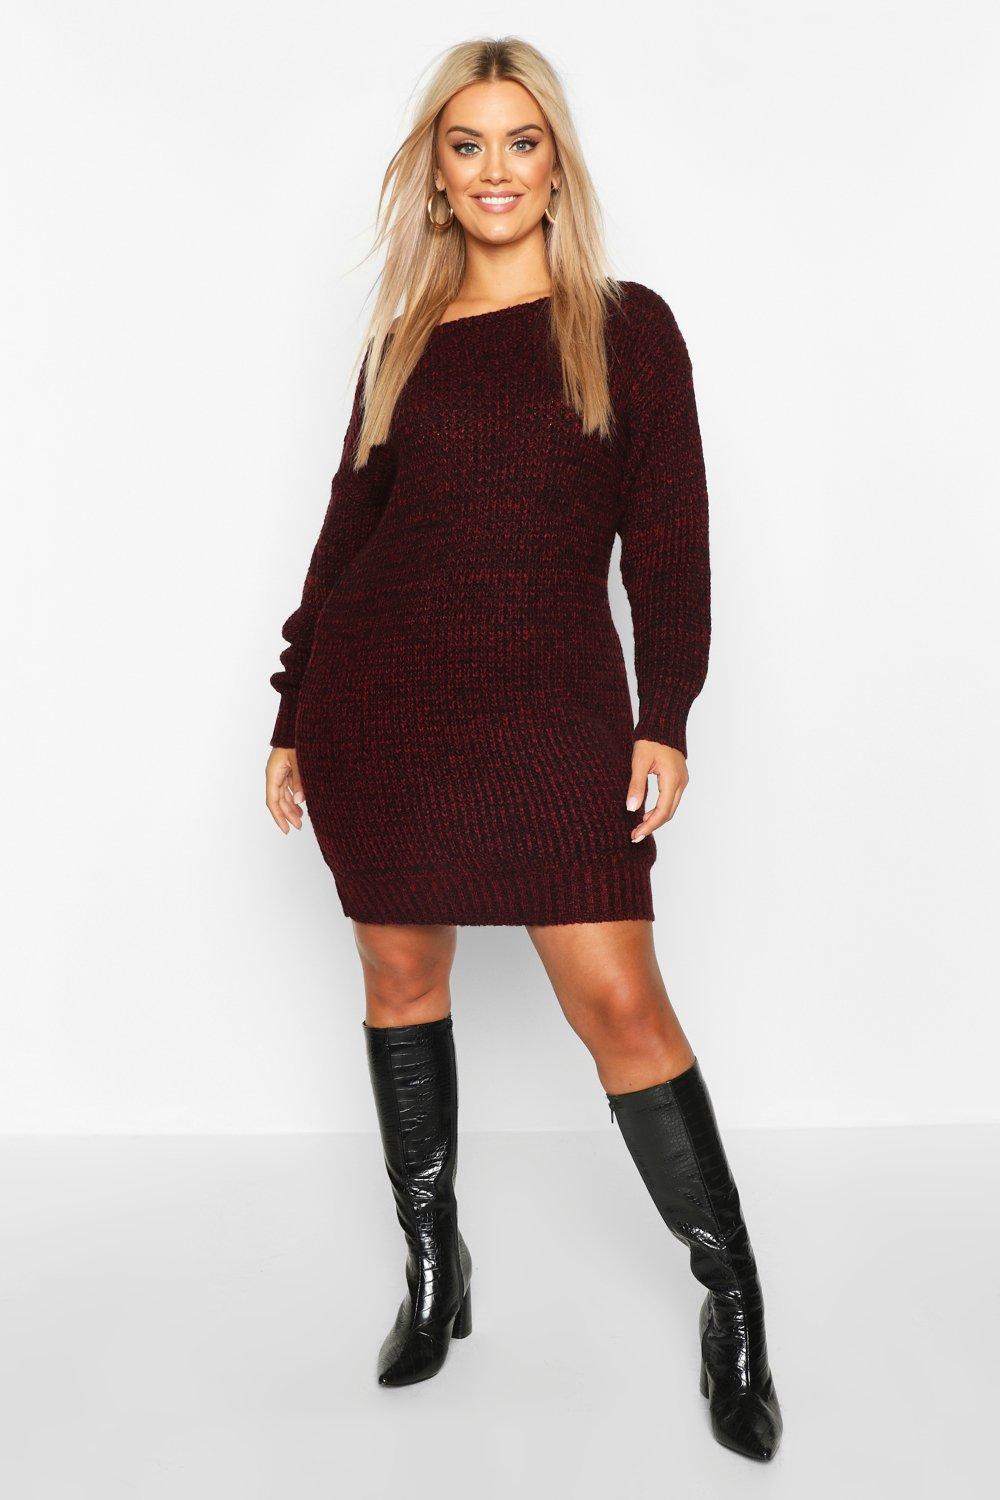 jumper dress with knee high boots